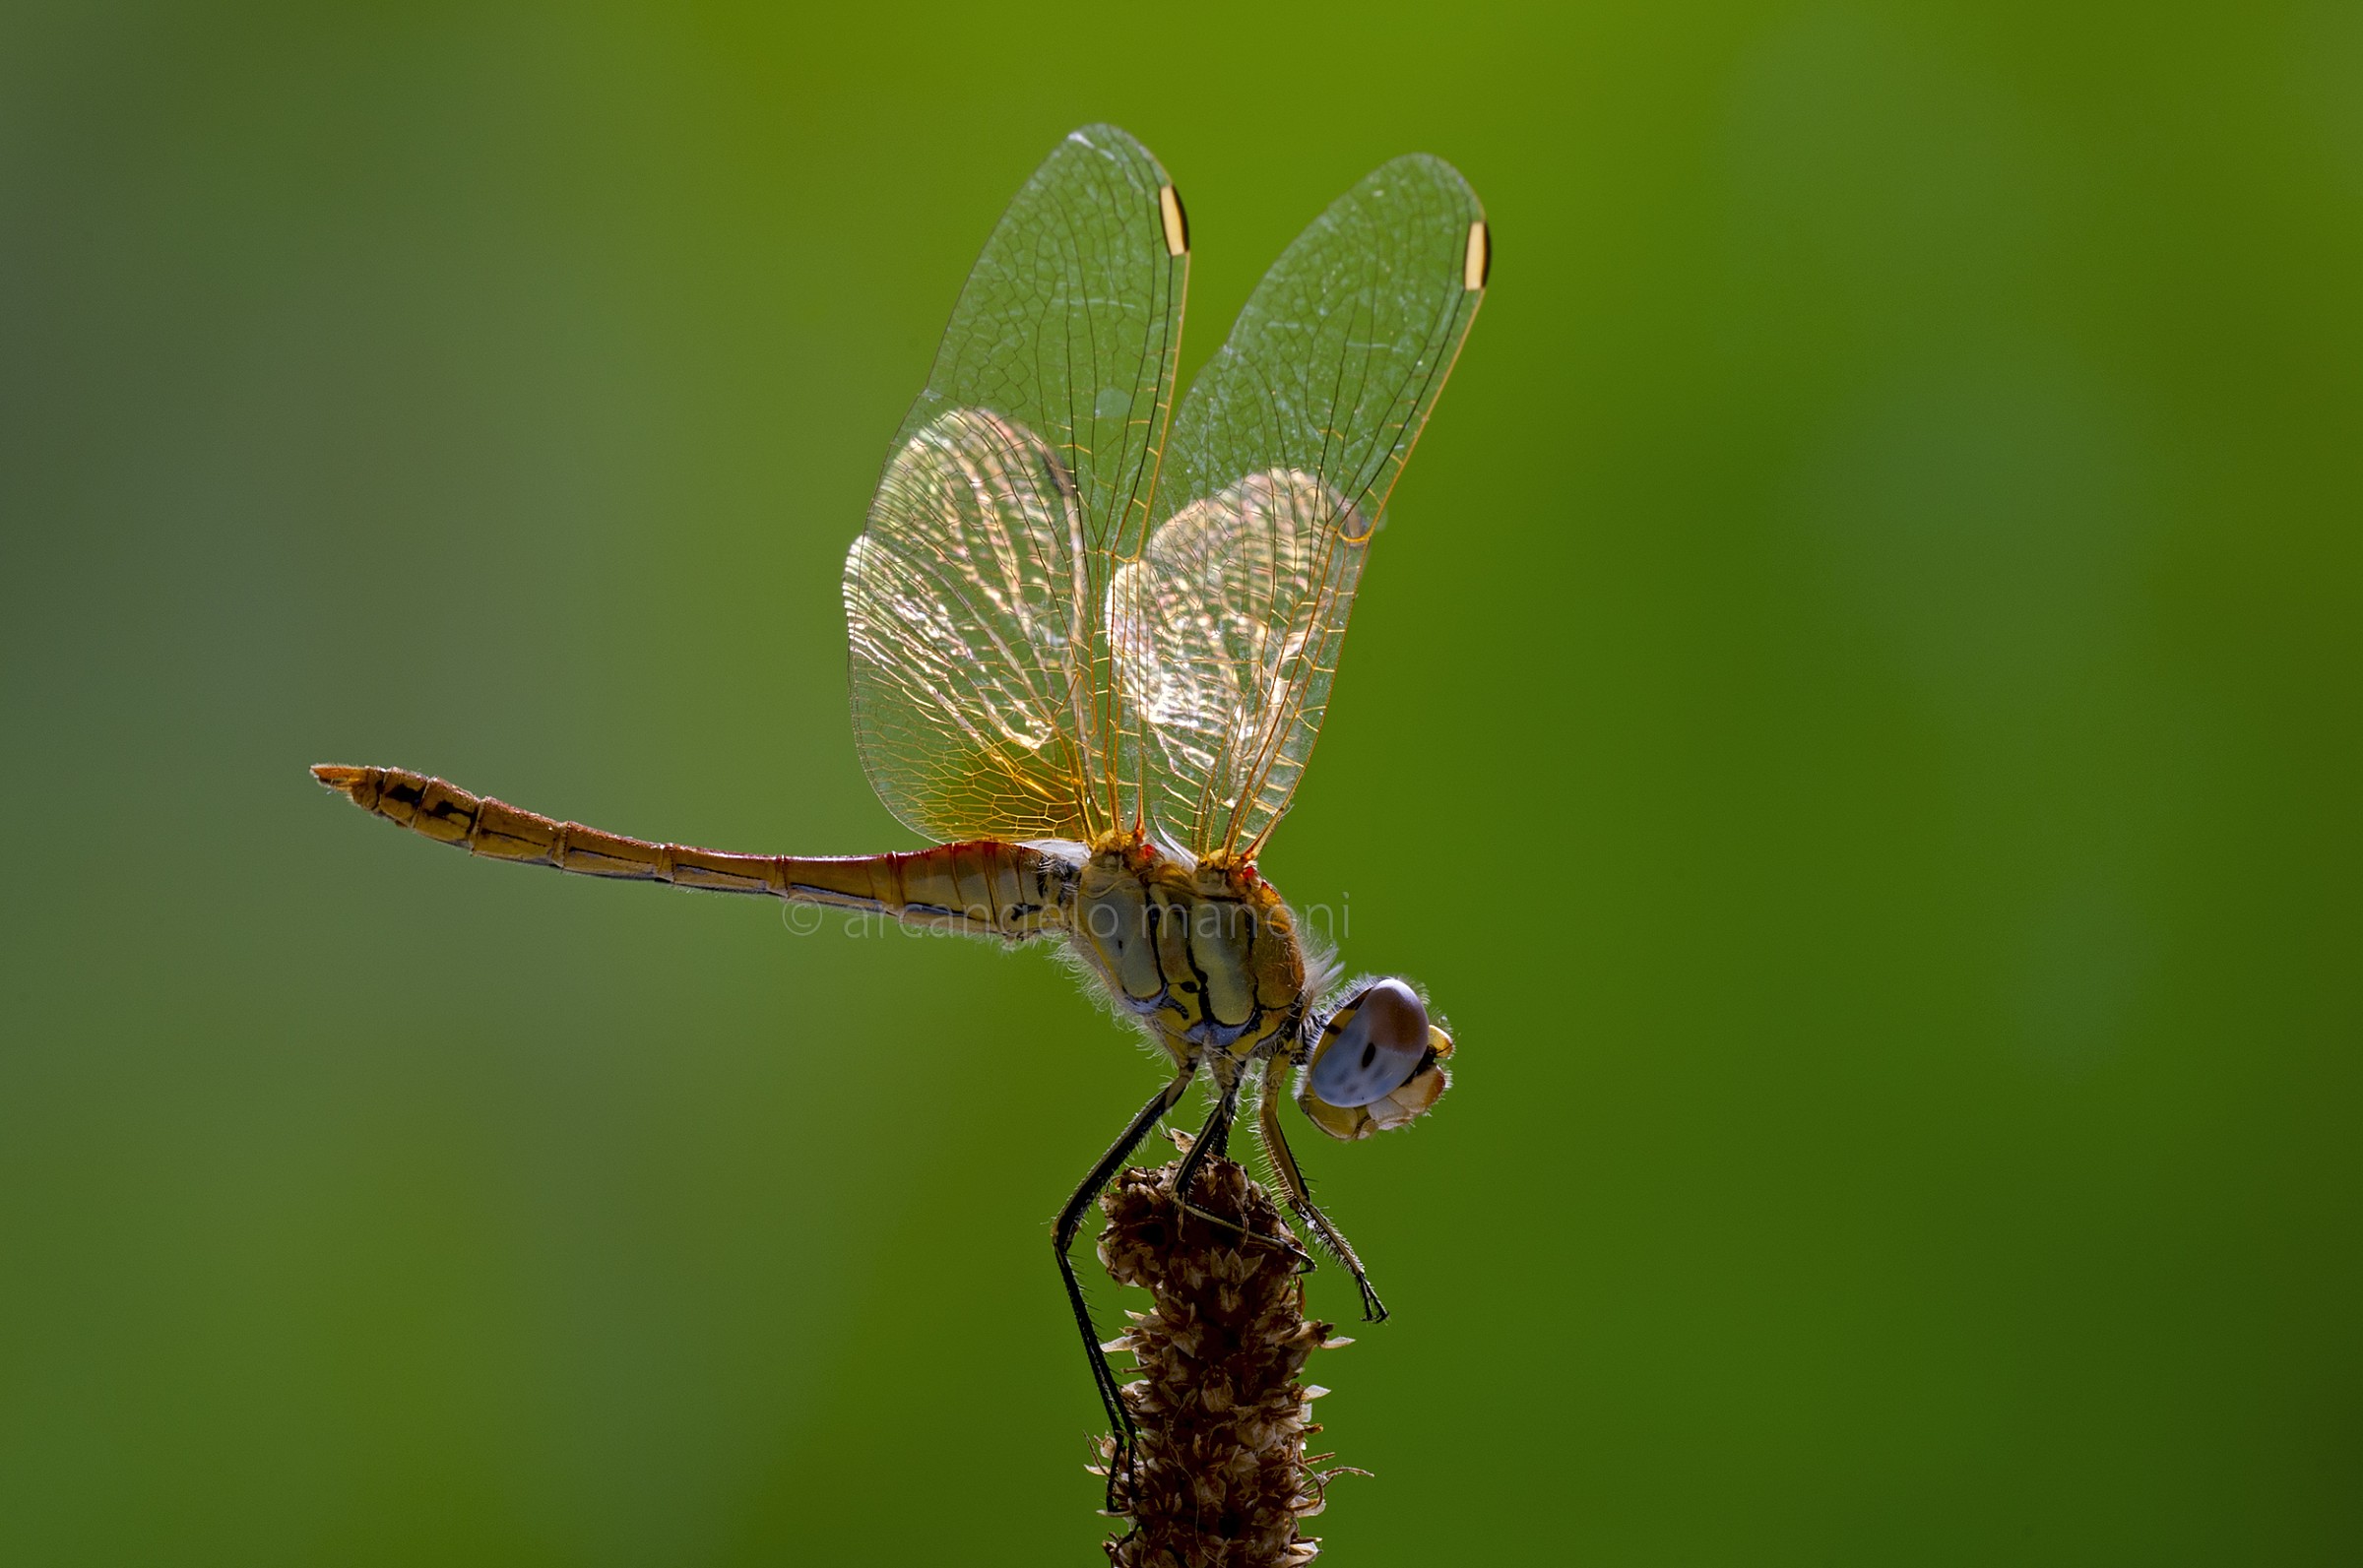 The last dragonfly...